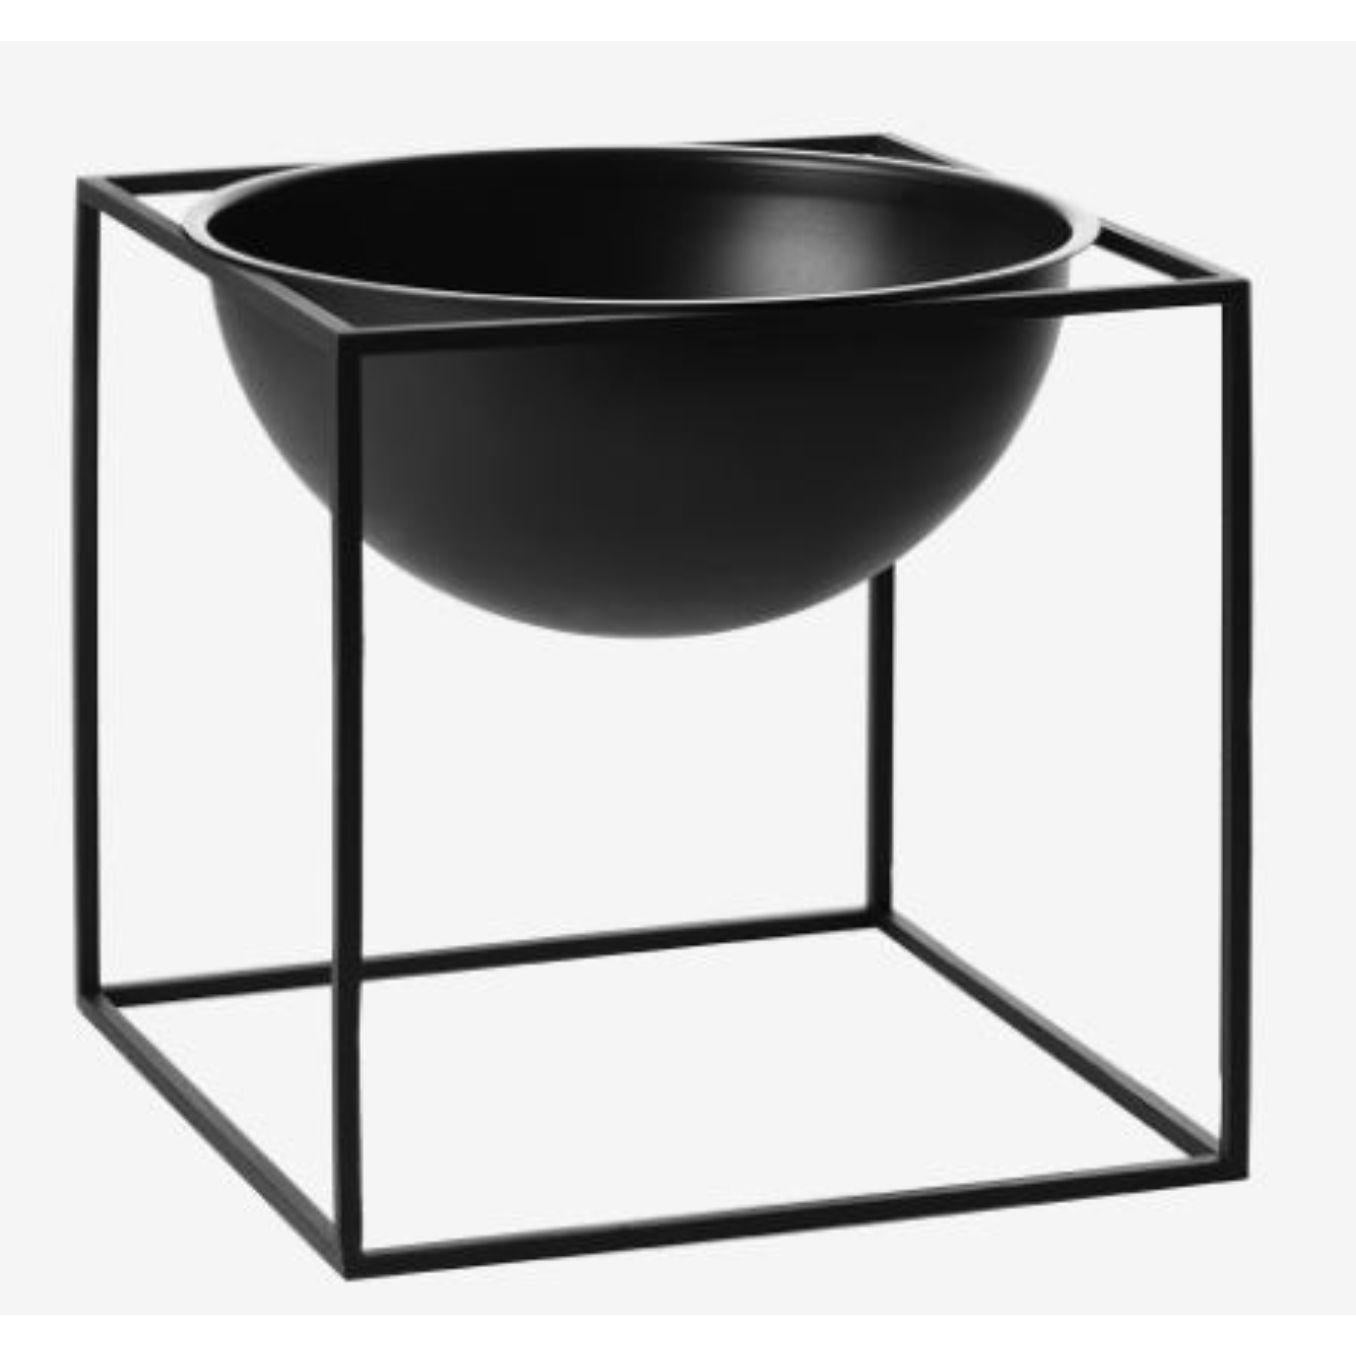 Black large Kubus bowl by Lassen
Dimensions: D 23 x W 23 x H 23 cm 
Materials: Metal 
Weight: 3 Kg

Kubus bowl is based on original sketches by Mogens Lassen, and contains elements from Bauhaus, which Mogens Lassen took inspiration from. Kubus